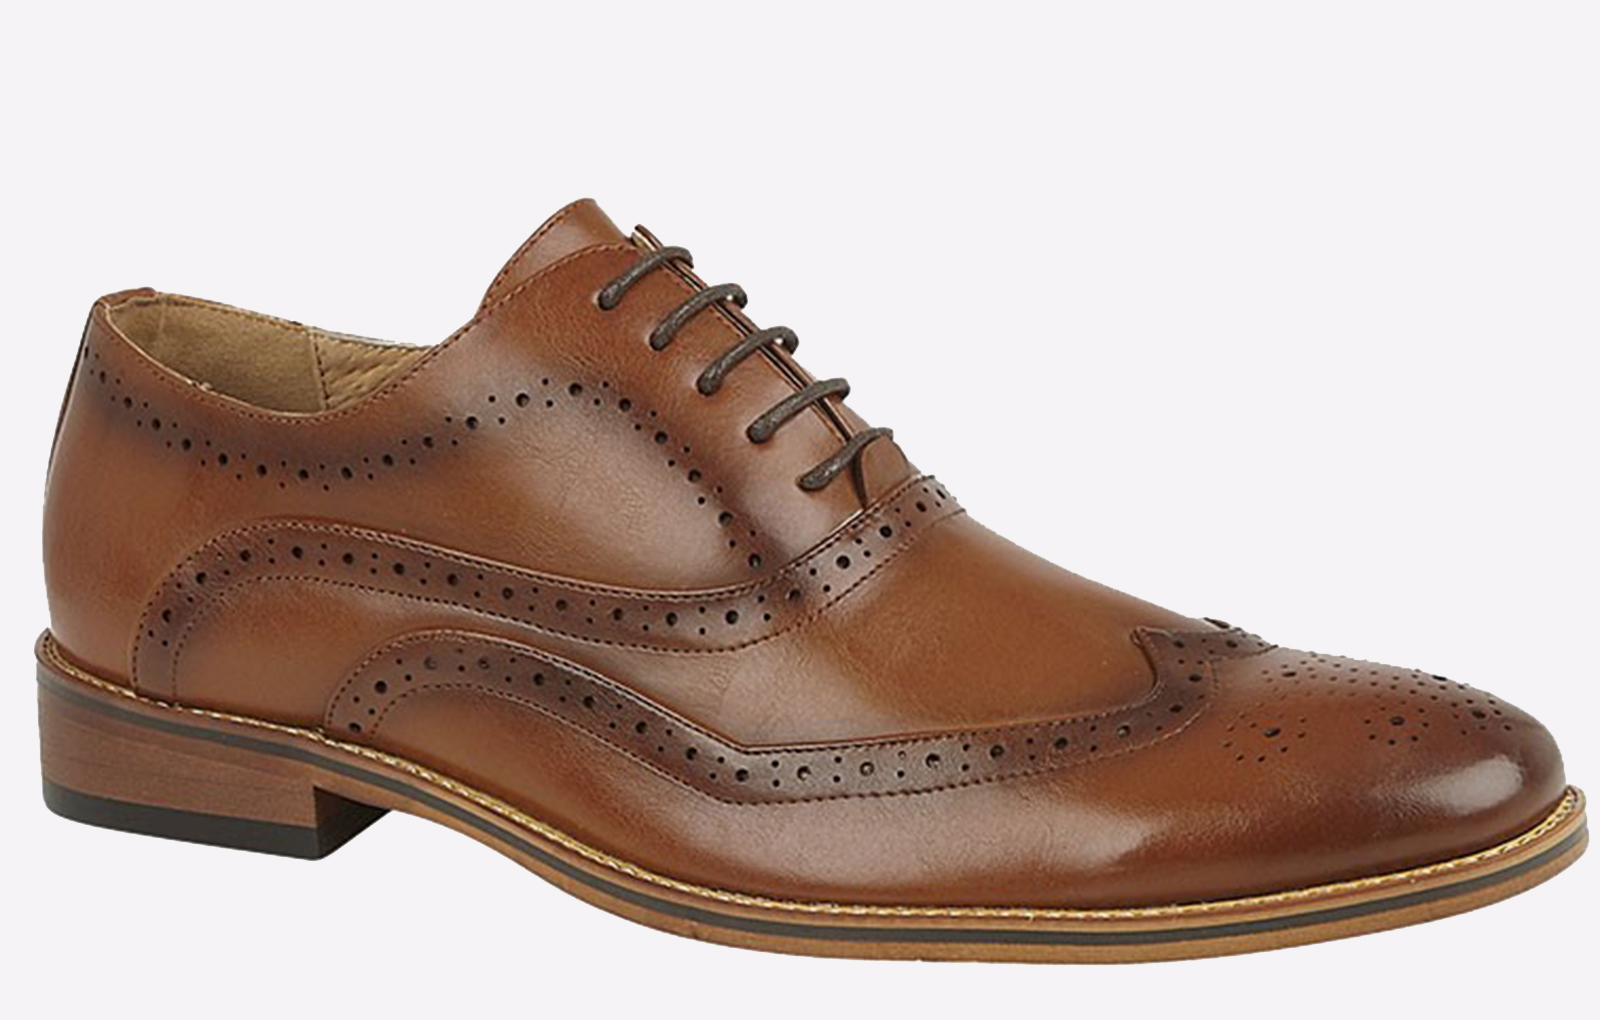 Goor Scottsdale Oxford Brogue Shoes Mens  - GBD-2202